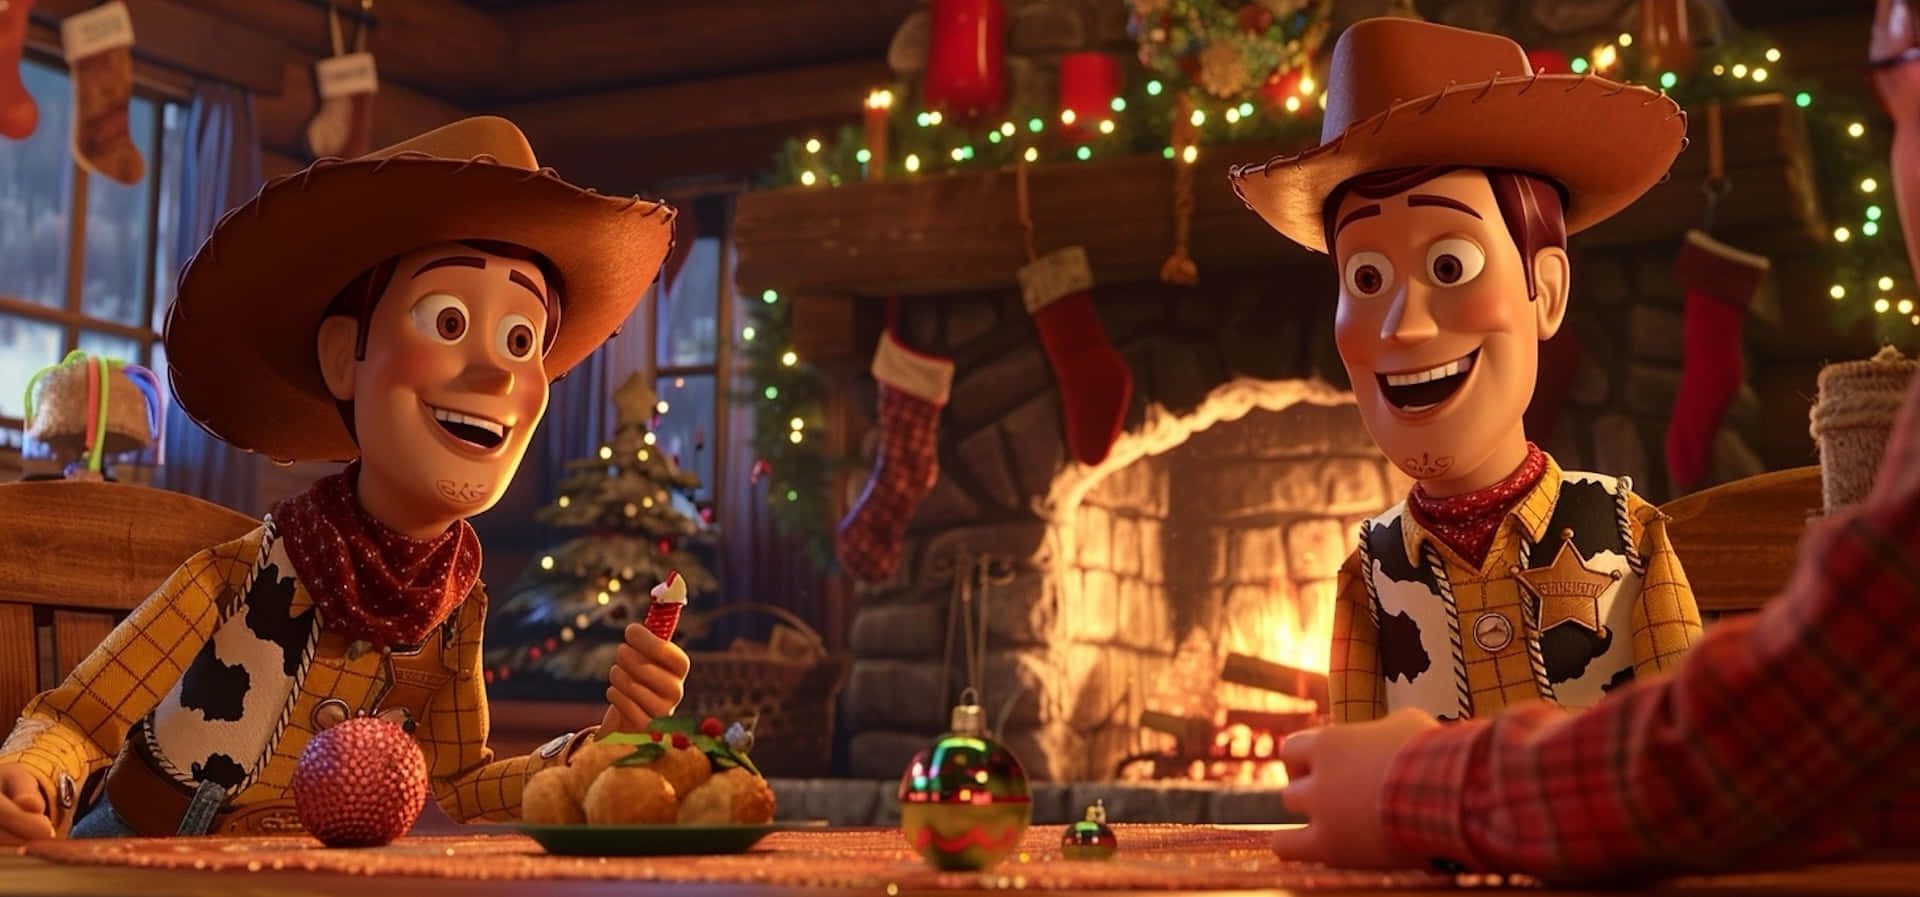 Animated Christmas Celebration With Toy Characters Wallpaper